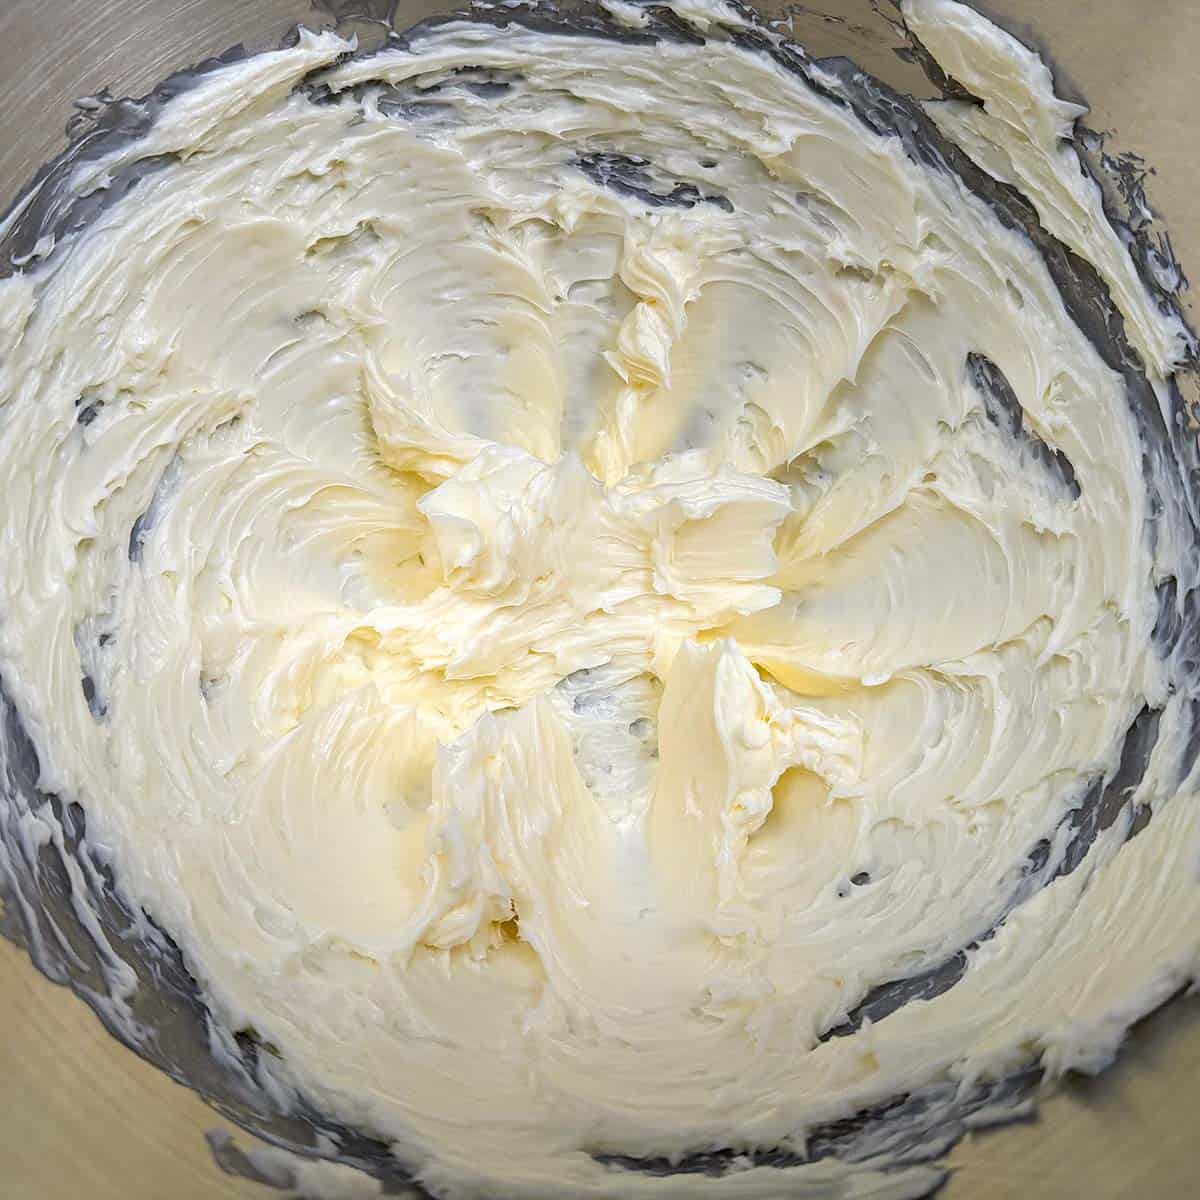 Creaming the butter in a mixer bowl.